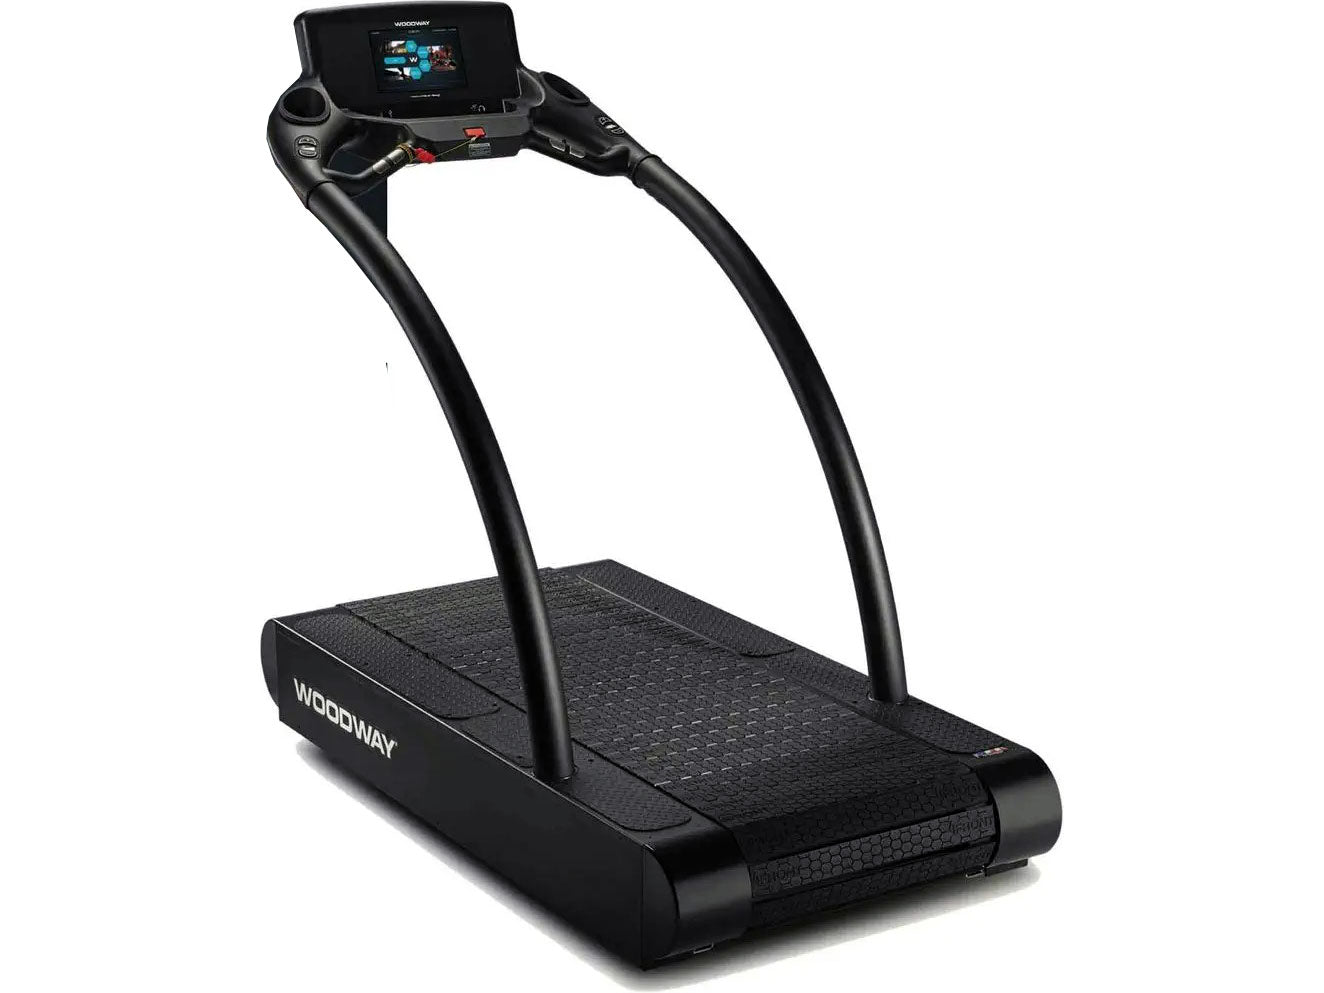 Used Woodway 4Front Prosmart Treadmill